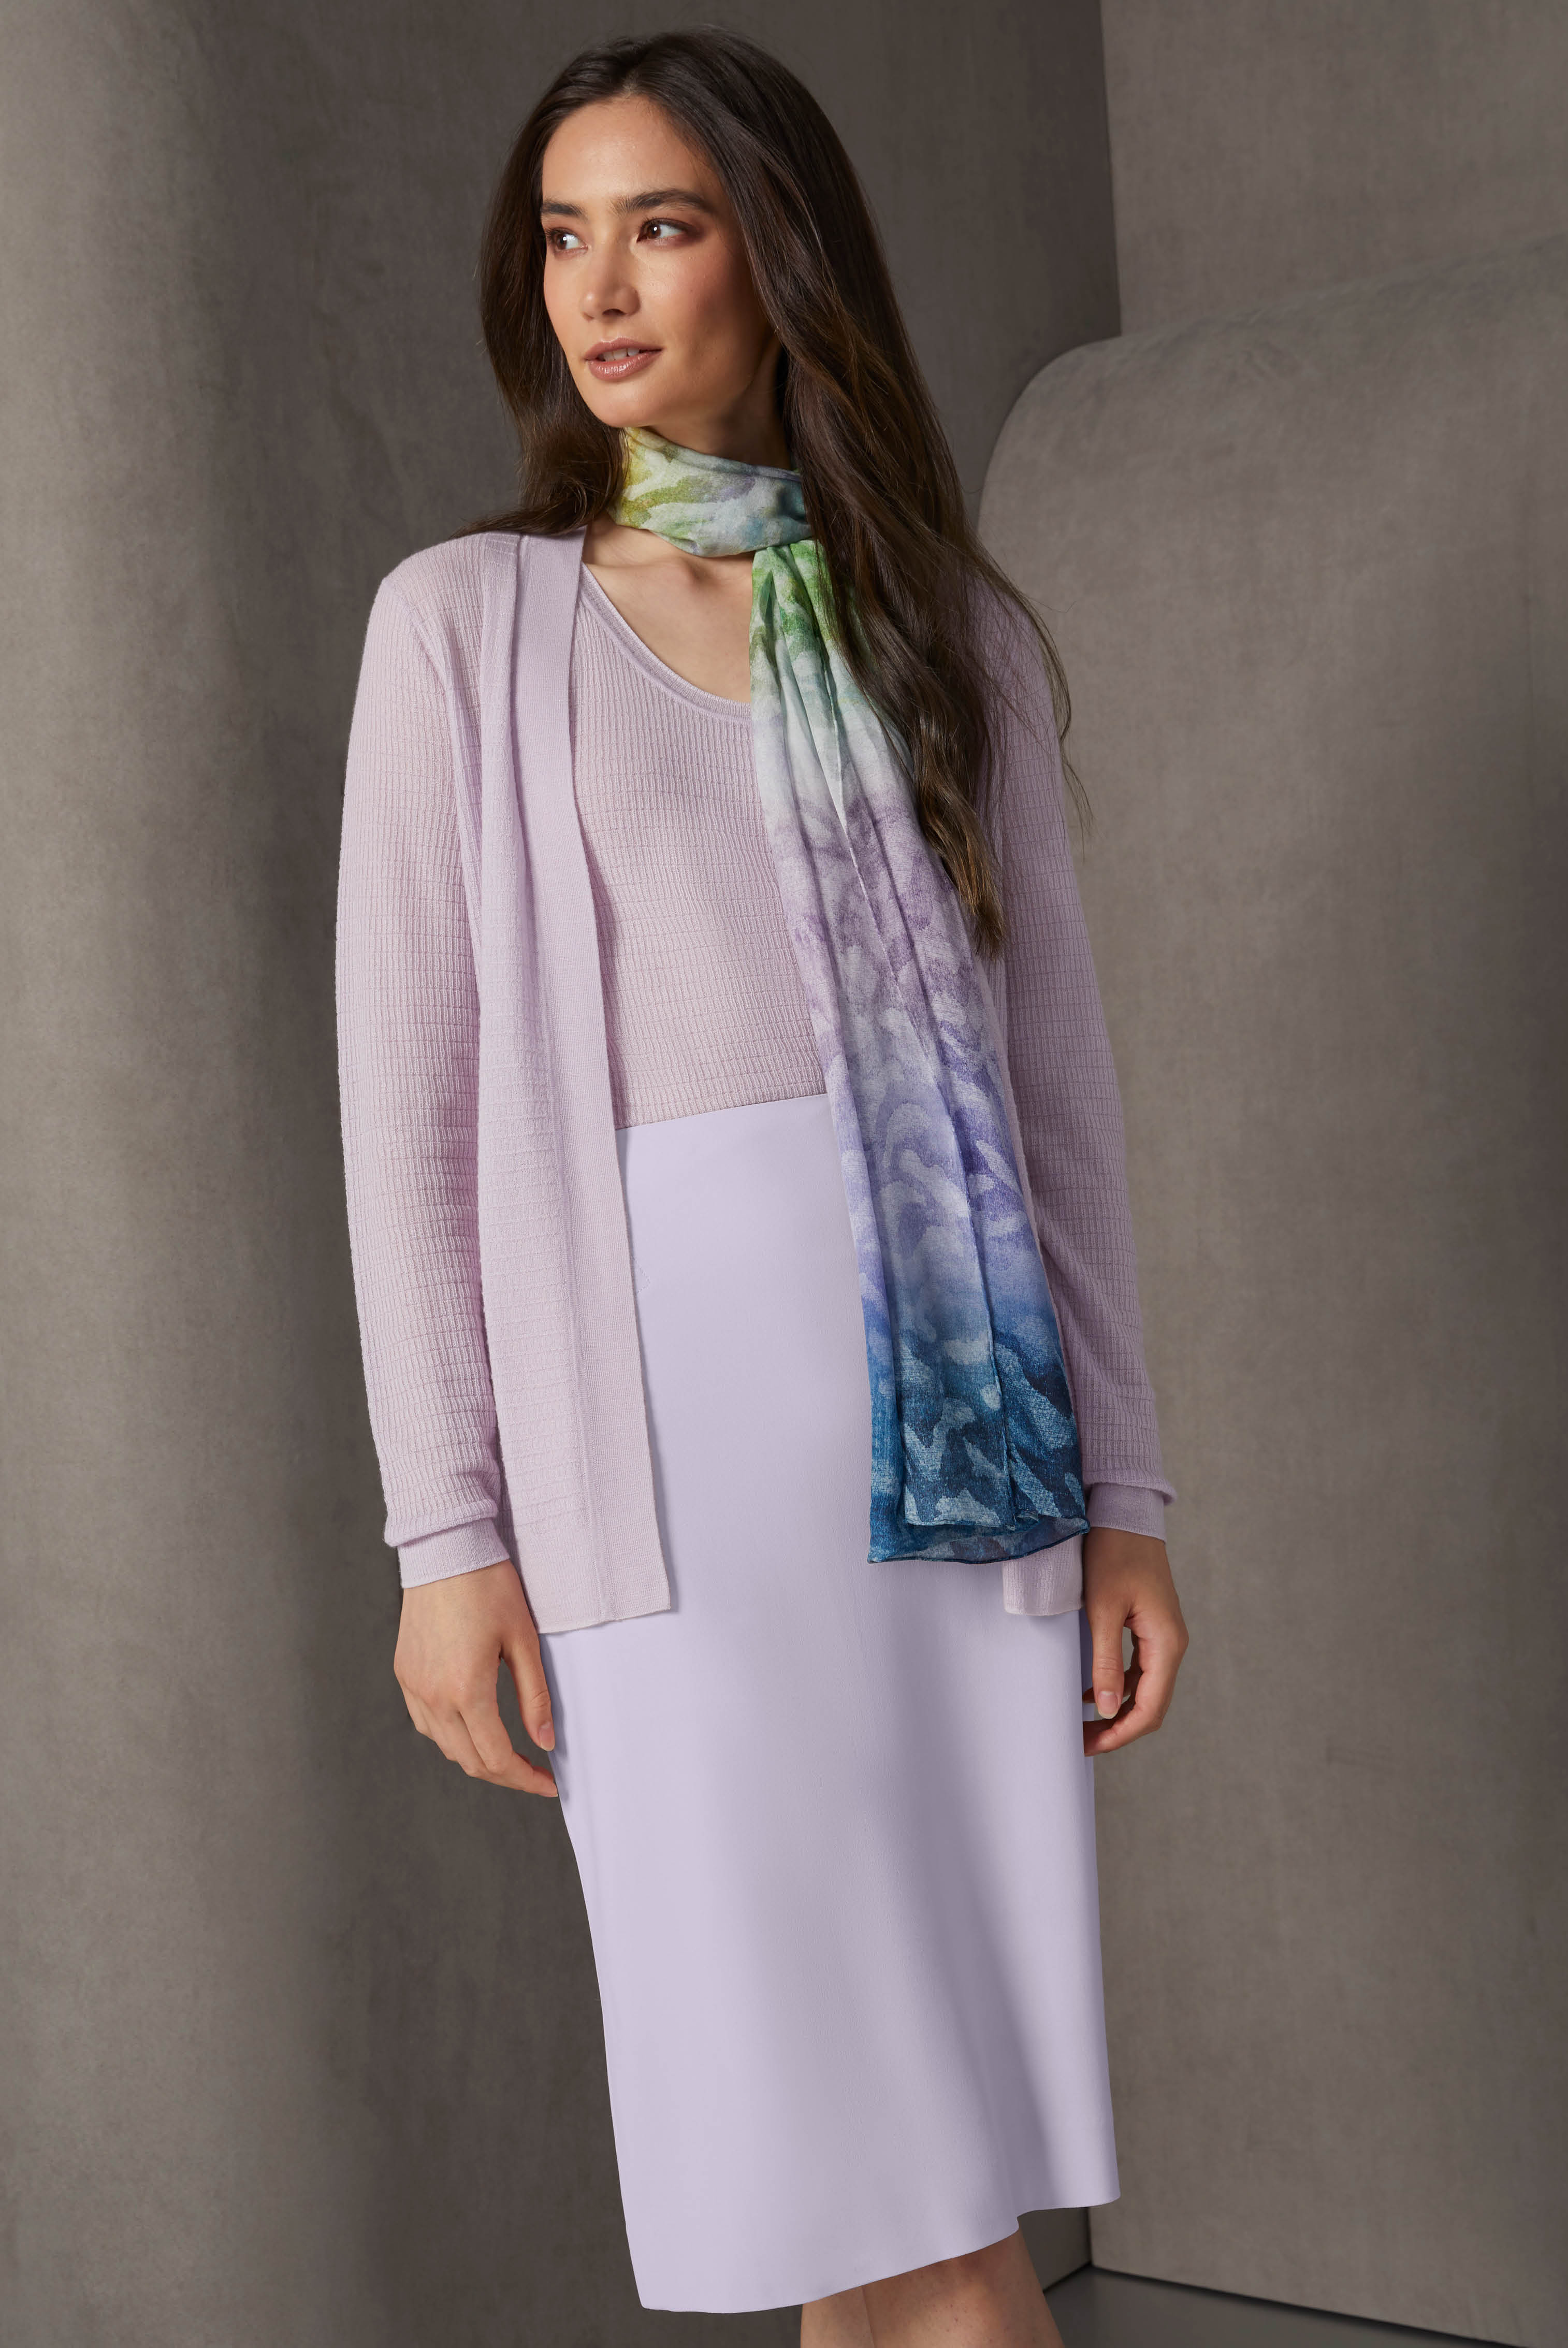 Dreamy lavender fog pieces excite the imagination. Anchoring the look is a silk-rich twill scarf in a twilight ombré landscape print that features painterly leaf shapes and contains the dominant tone of lavender.